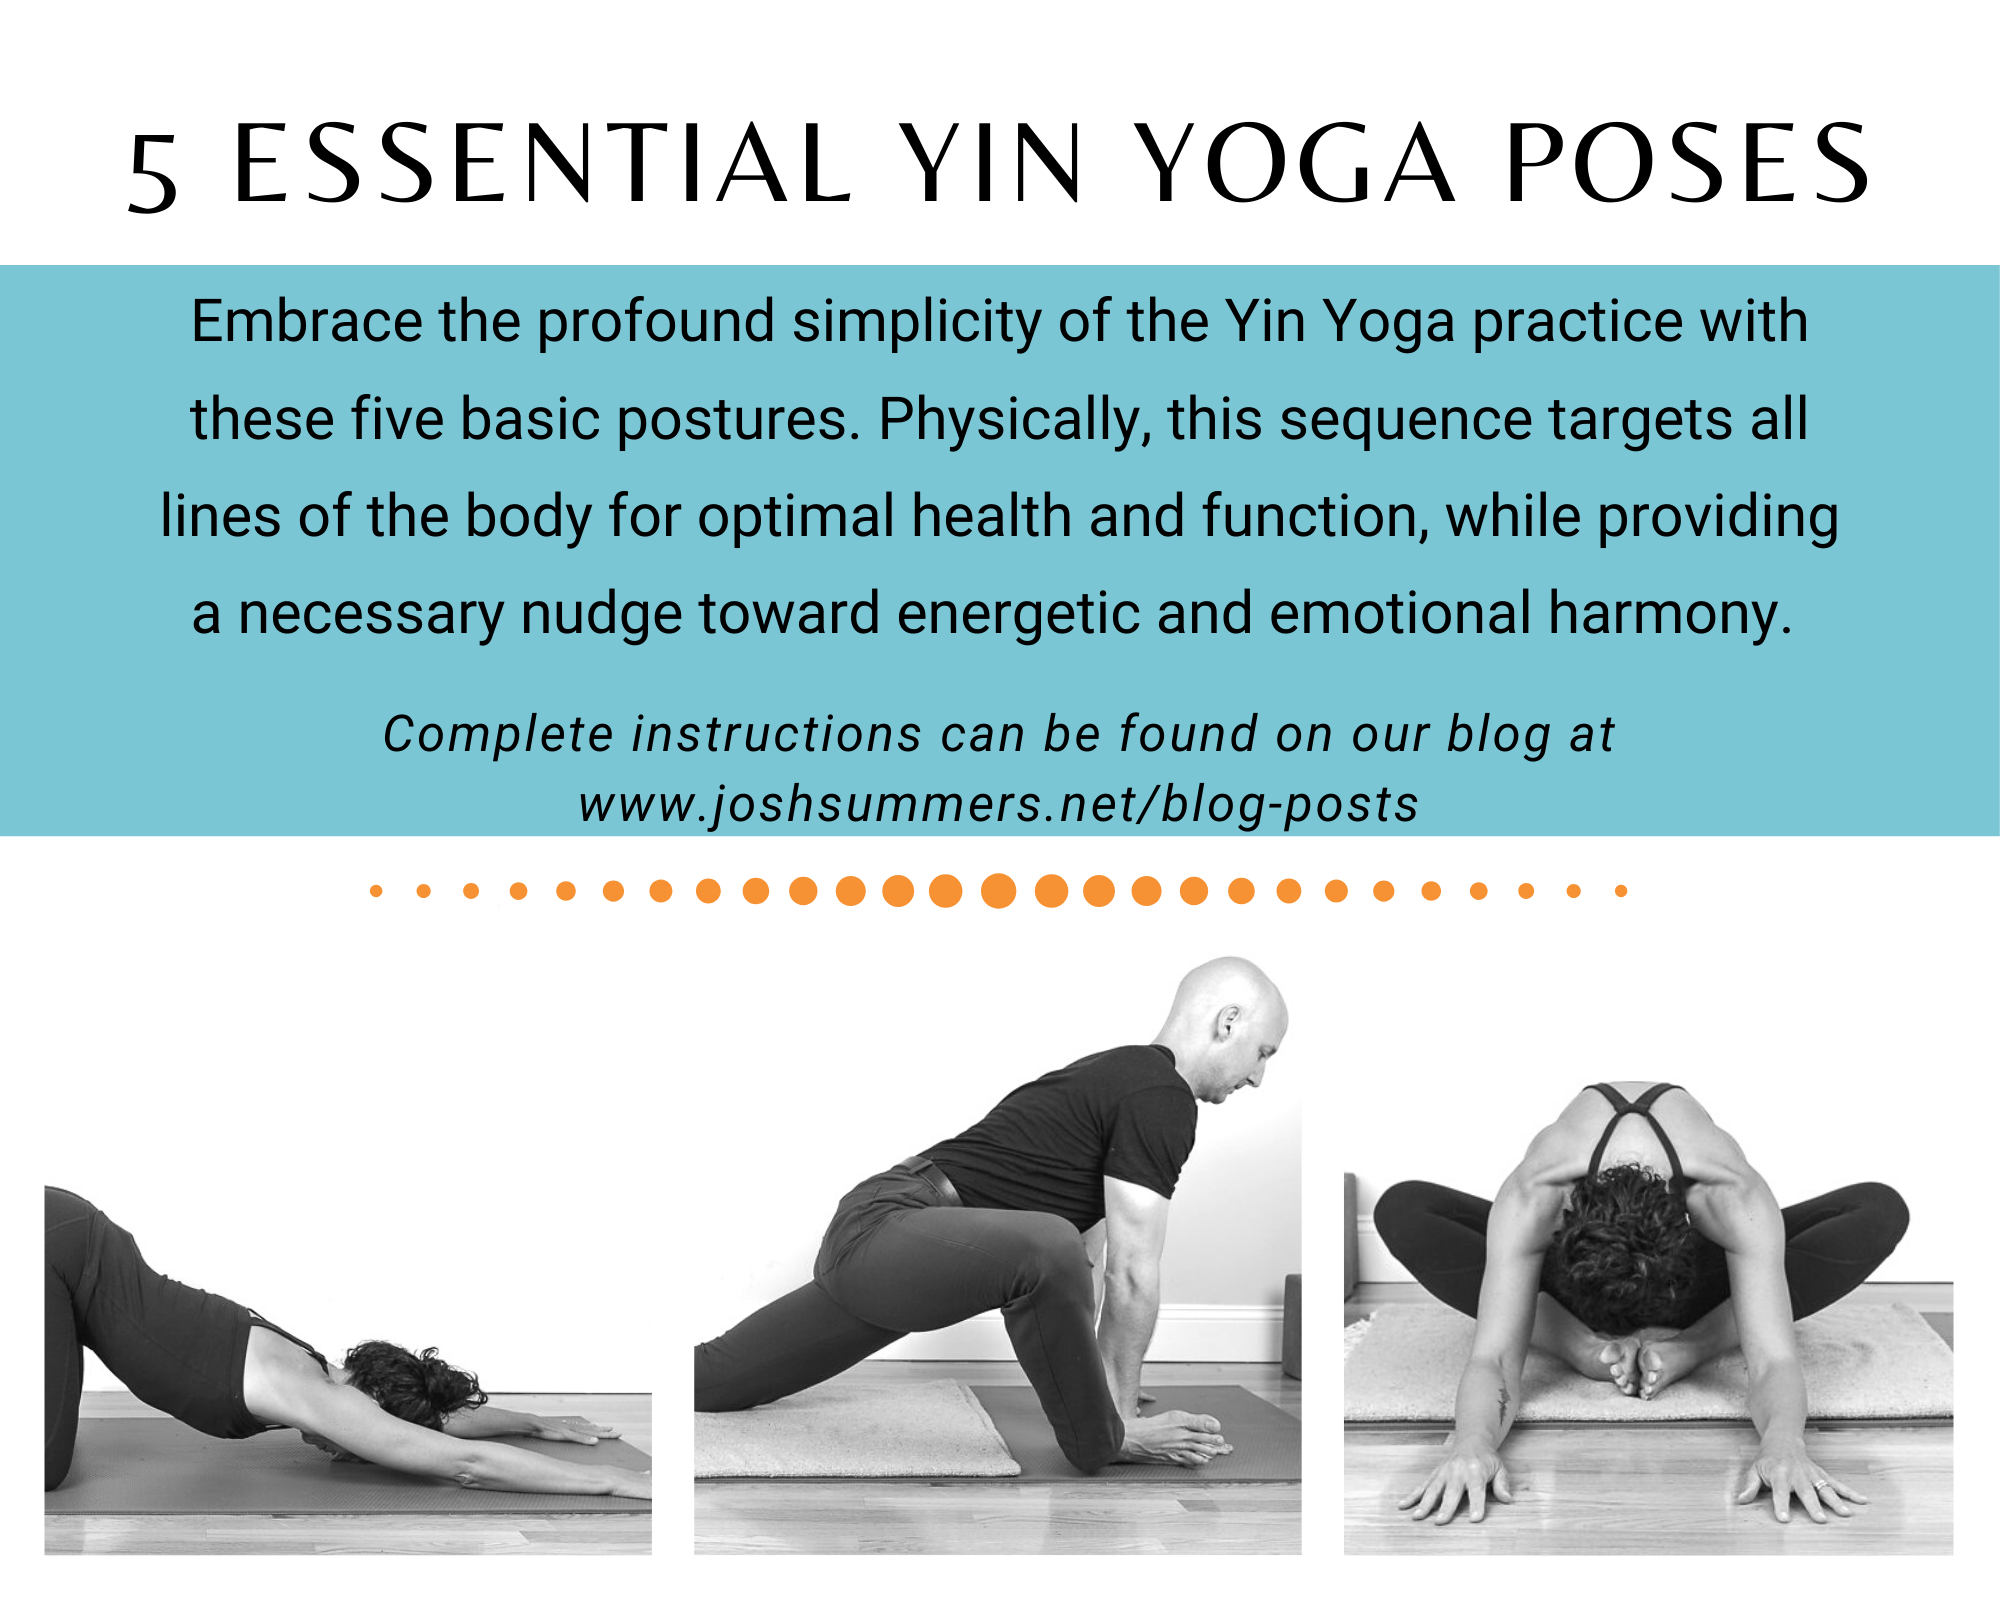 Yin Yoga Poses That Will Leave You Restored and Recharged - YOGA PRACTICE